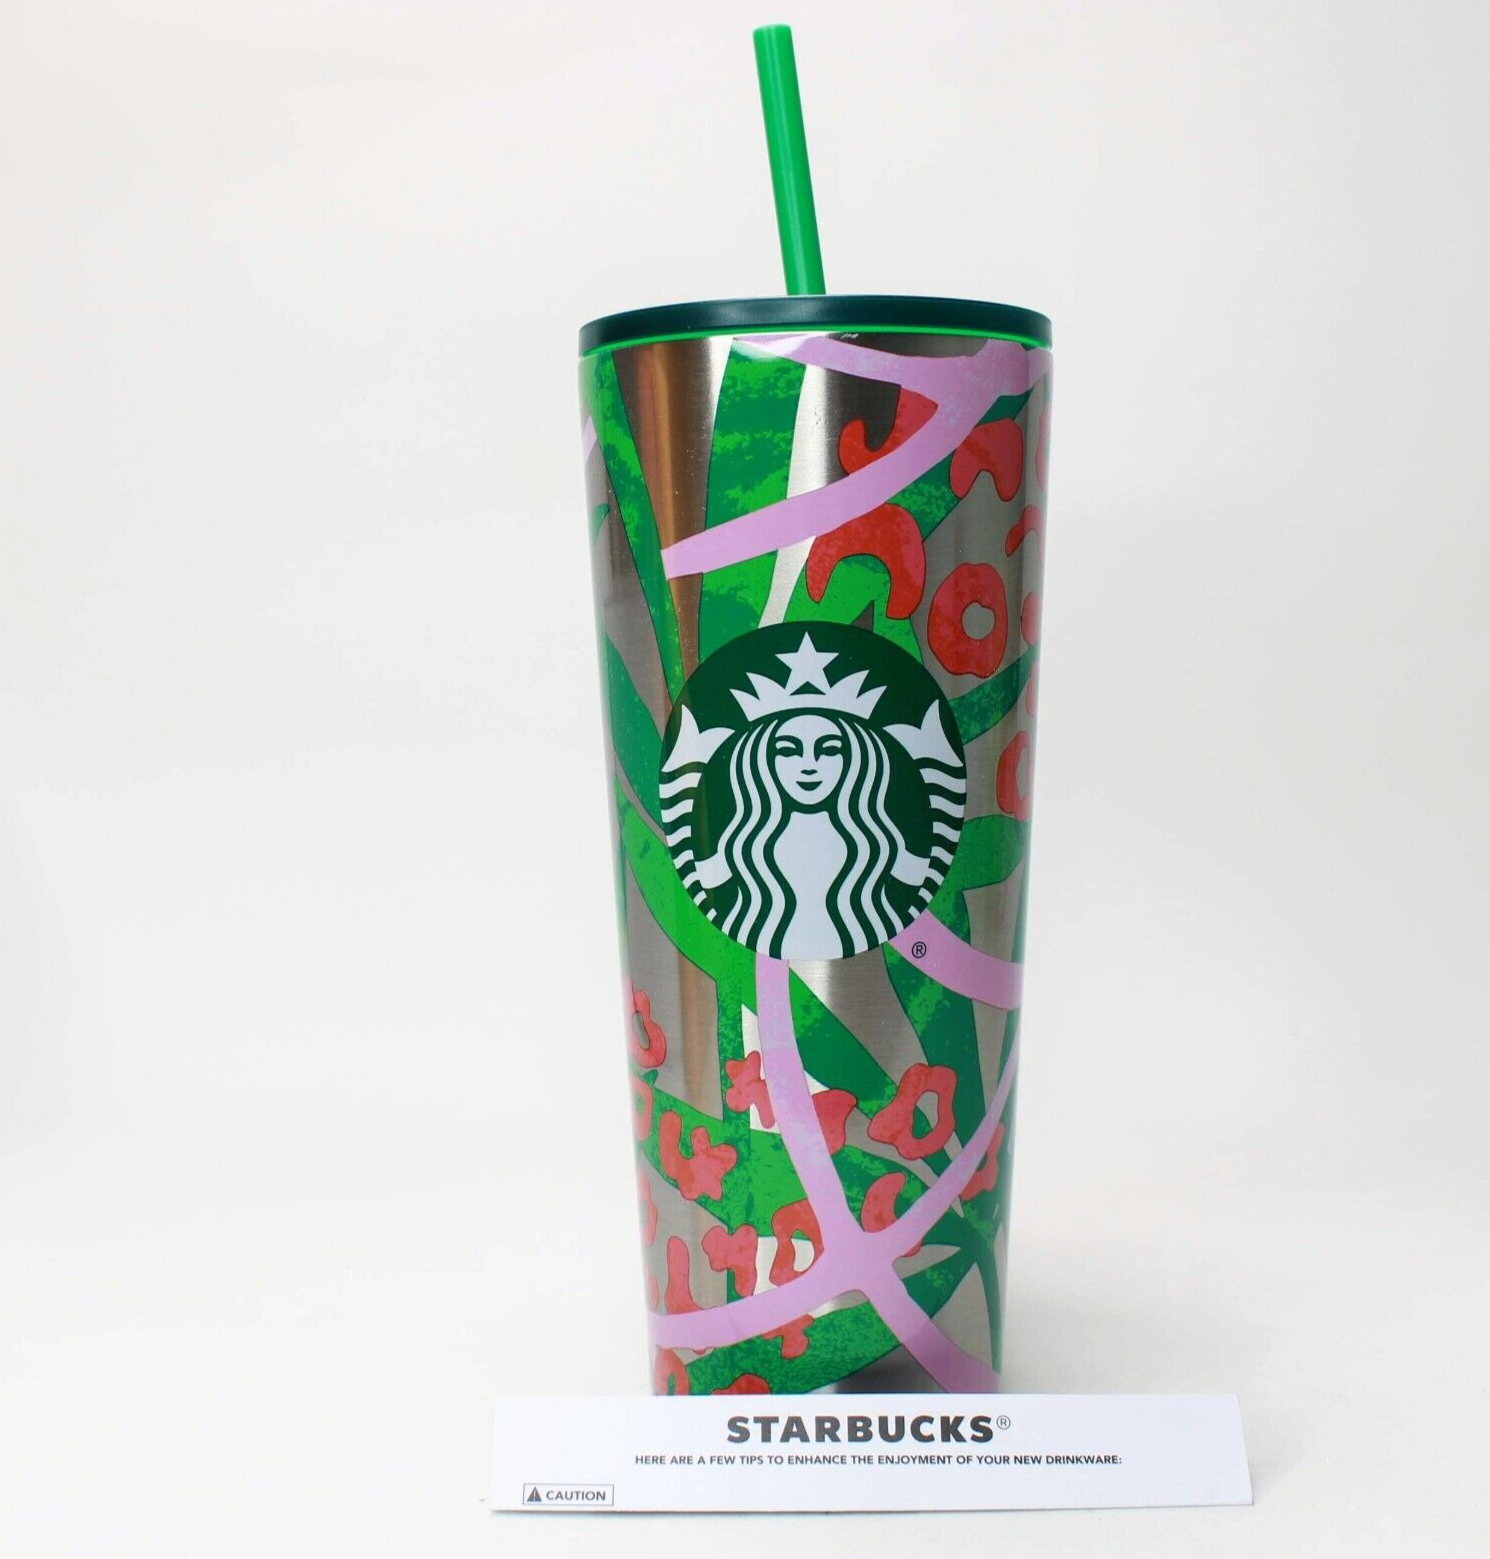 Cherry blossom Pink Cold Cup Starbucks Tumbler